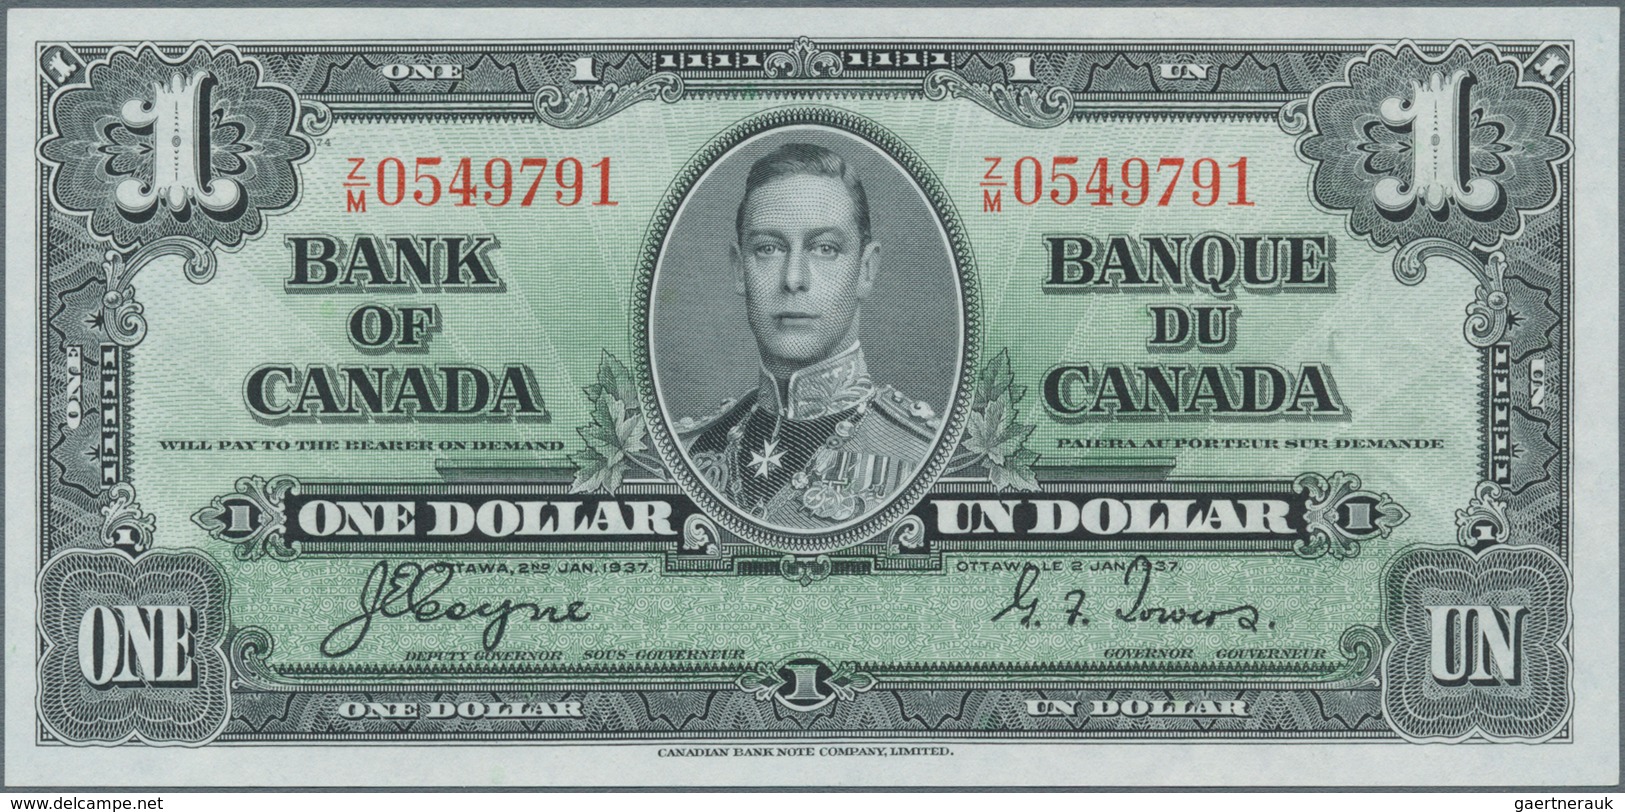 Canada: 1 Dollar 1937 P. 58e, Light Creases At Right Border, No Holes Or Tears, Condition: XF+ To AU - Kanada